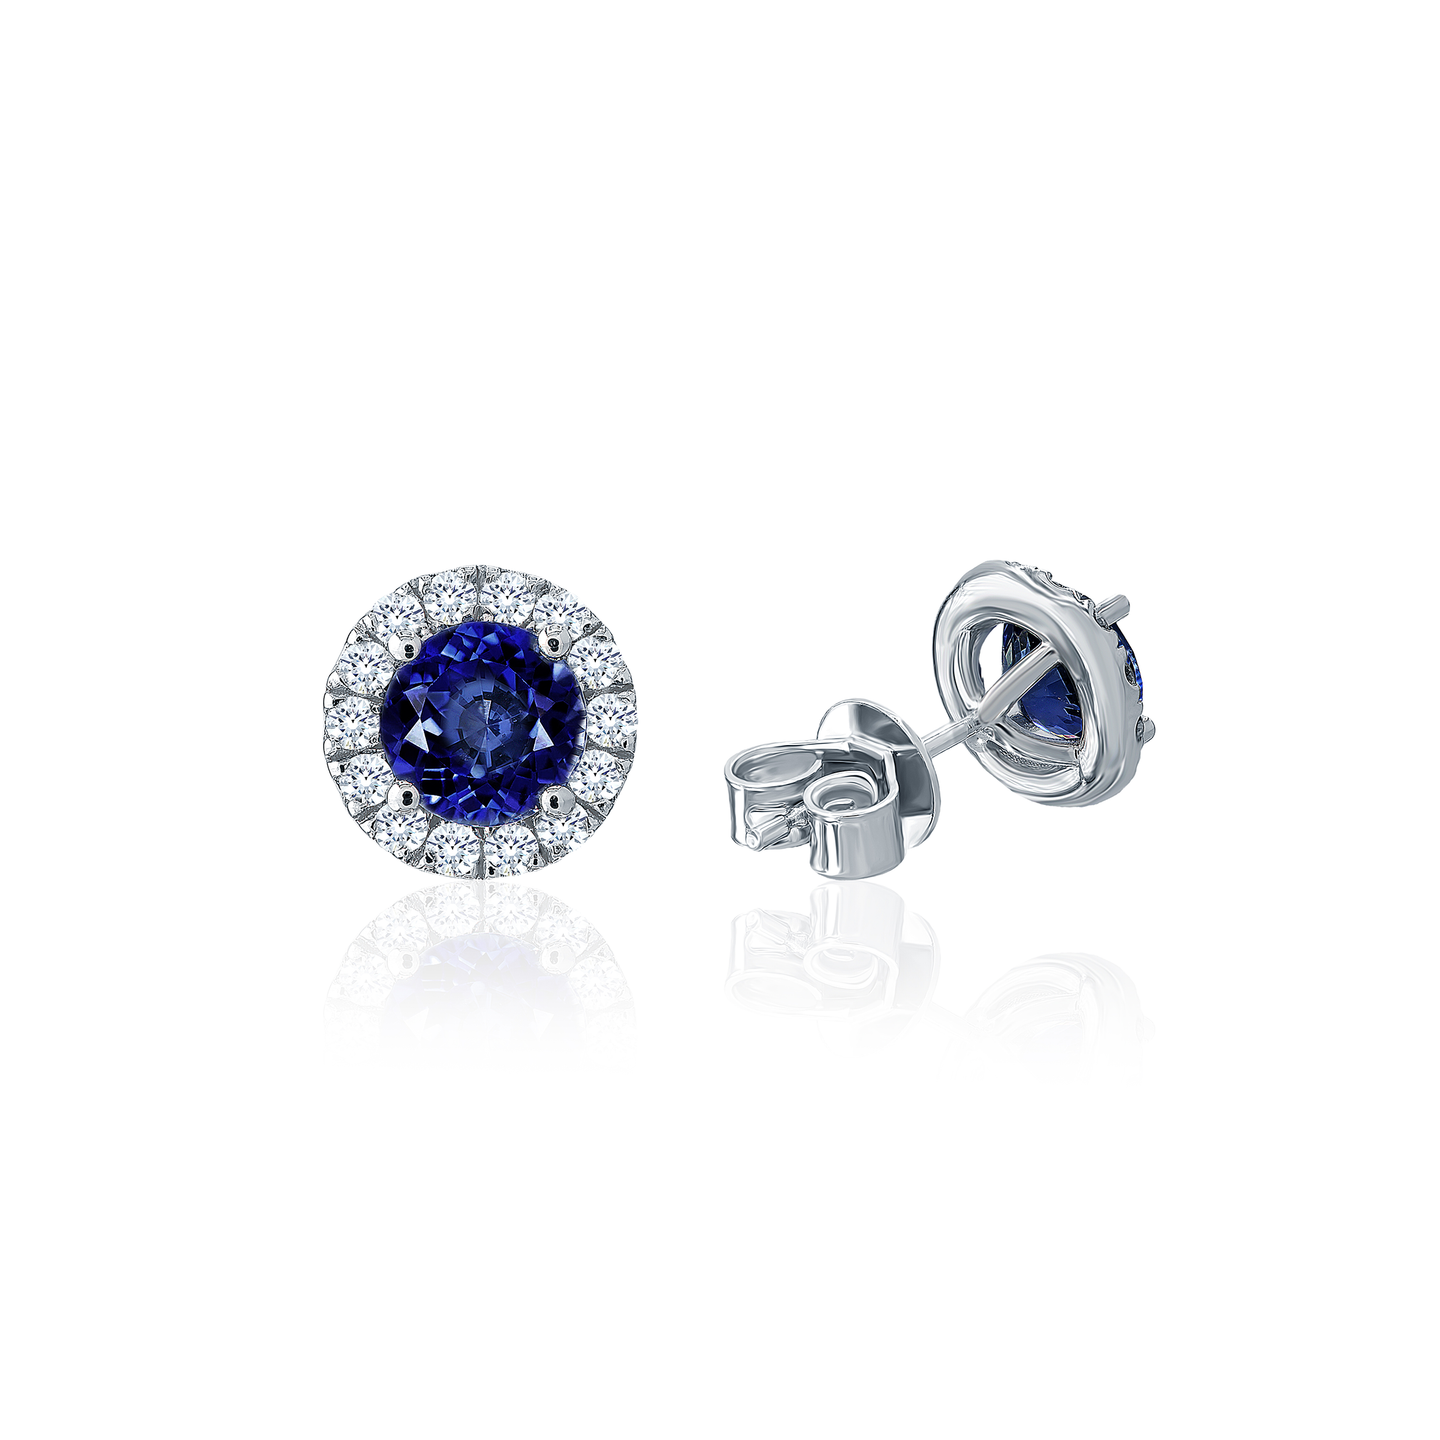 Sabel Collection White Gold Round Sapphire and Diamond Earrings